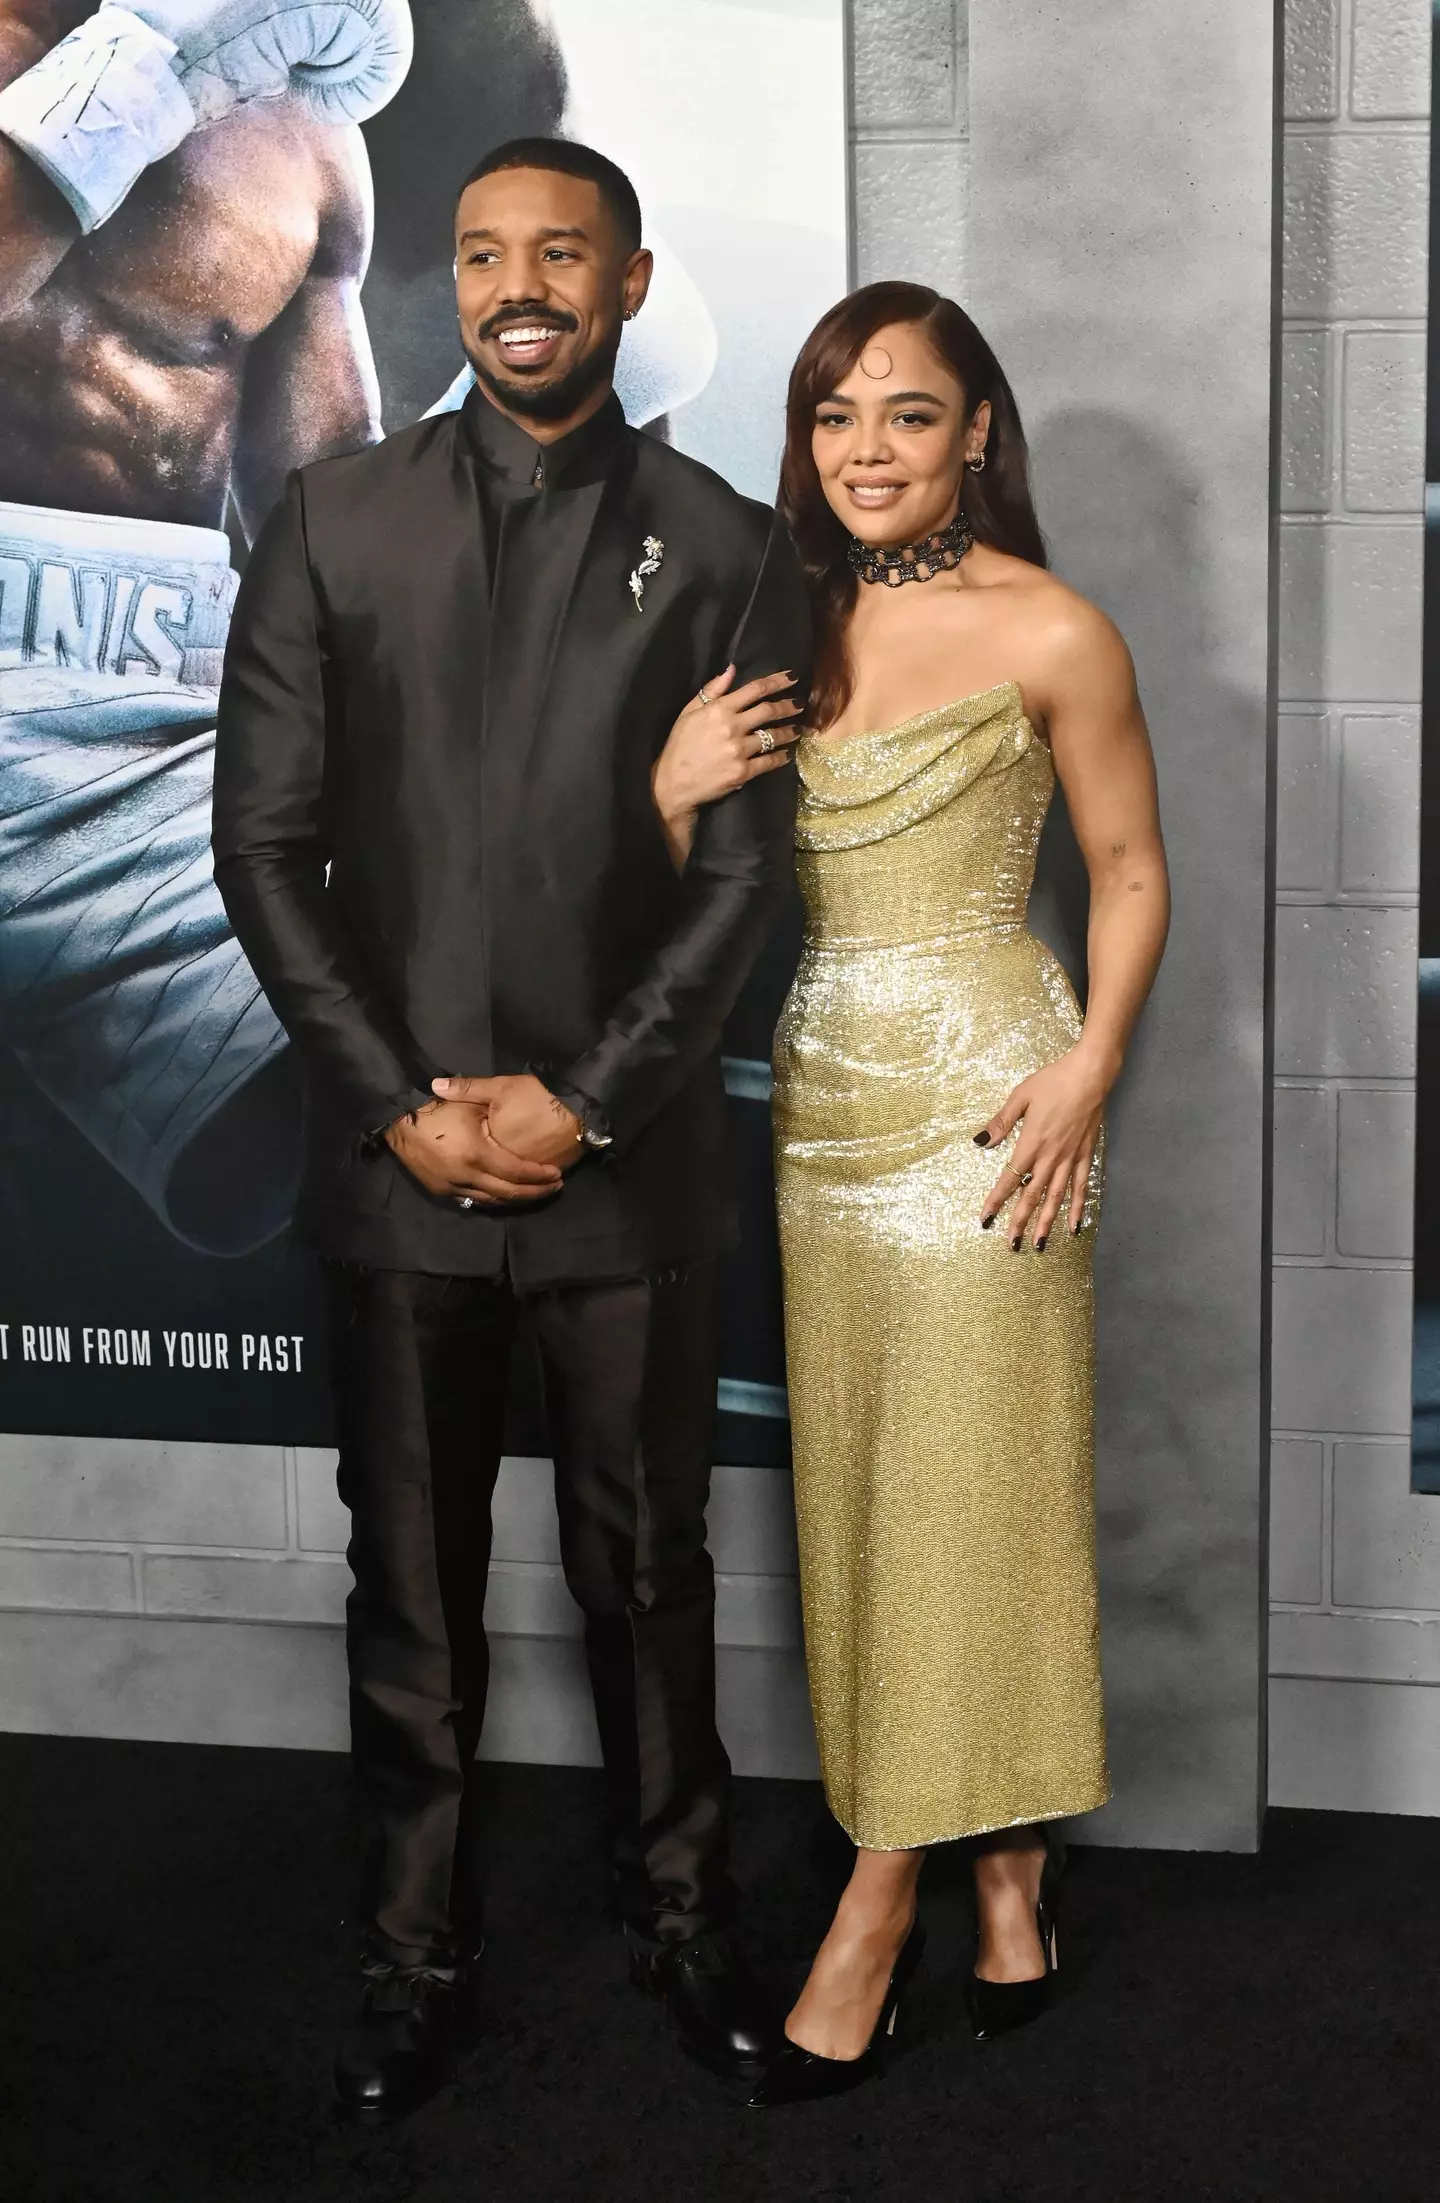 Michael B. Jordan and Tessa Thompson attended couple's therapy together.